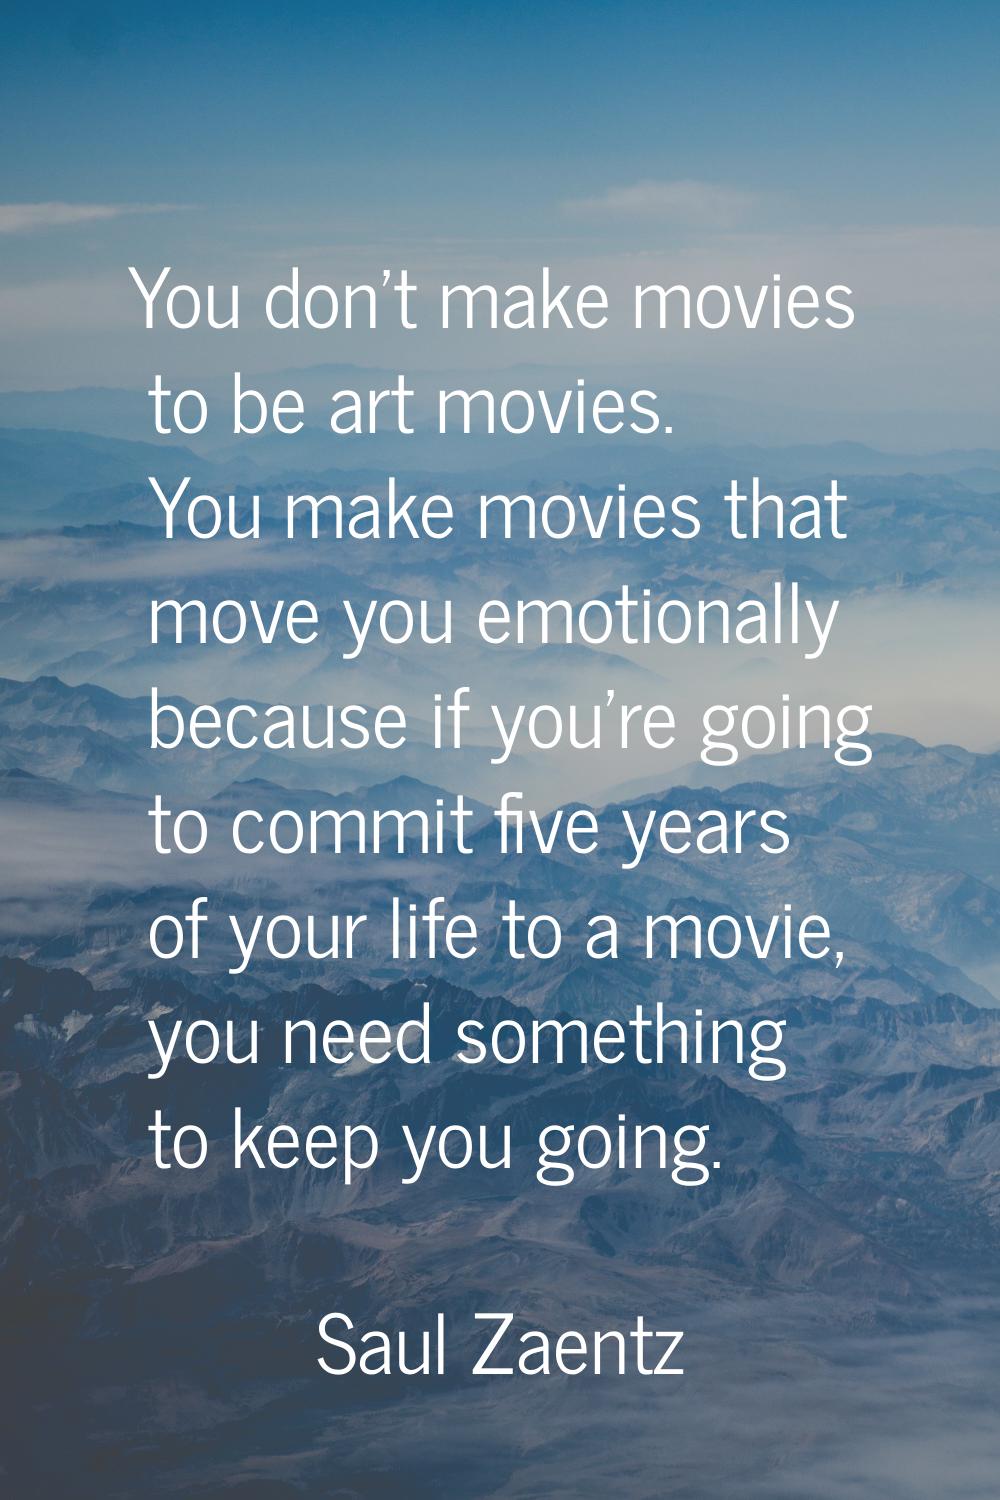 You don't make movies to be art movies. You make movies that move you emotionally because if you're